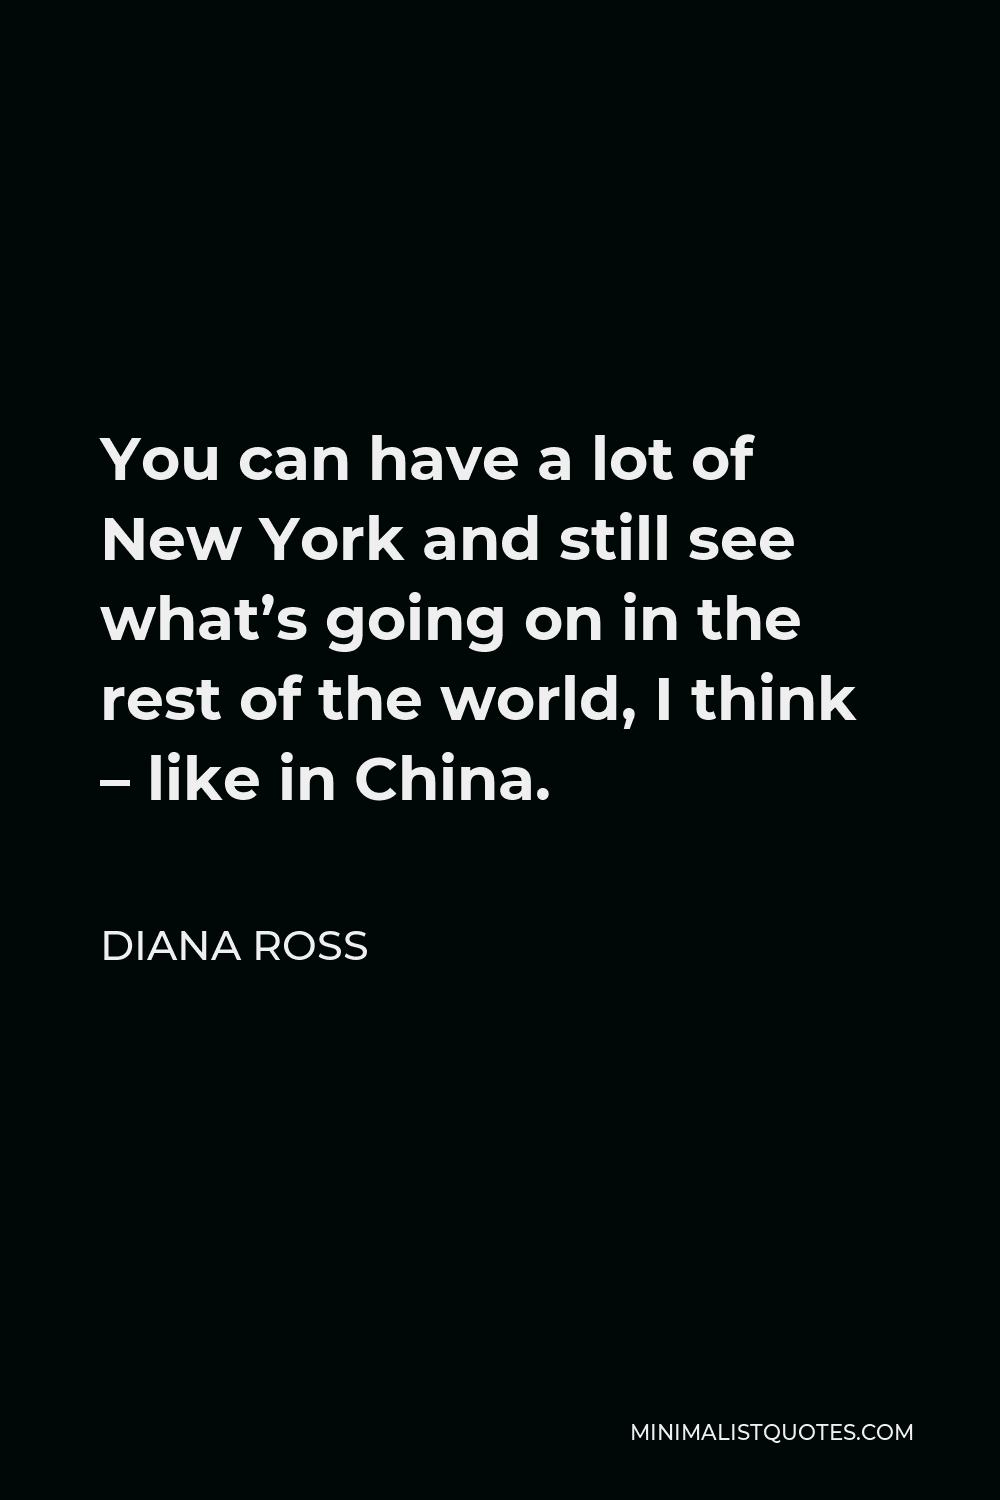 Diana Ross Quote - You can have a lot of New York and still see what’s going on in the rest of the world, I think – like in China.